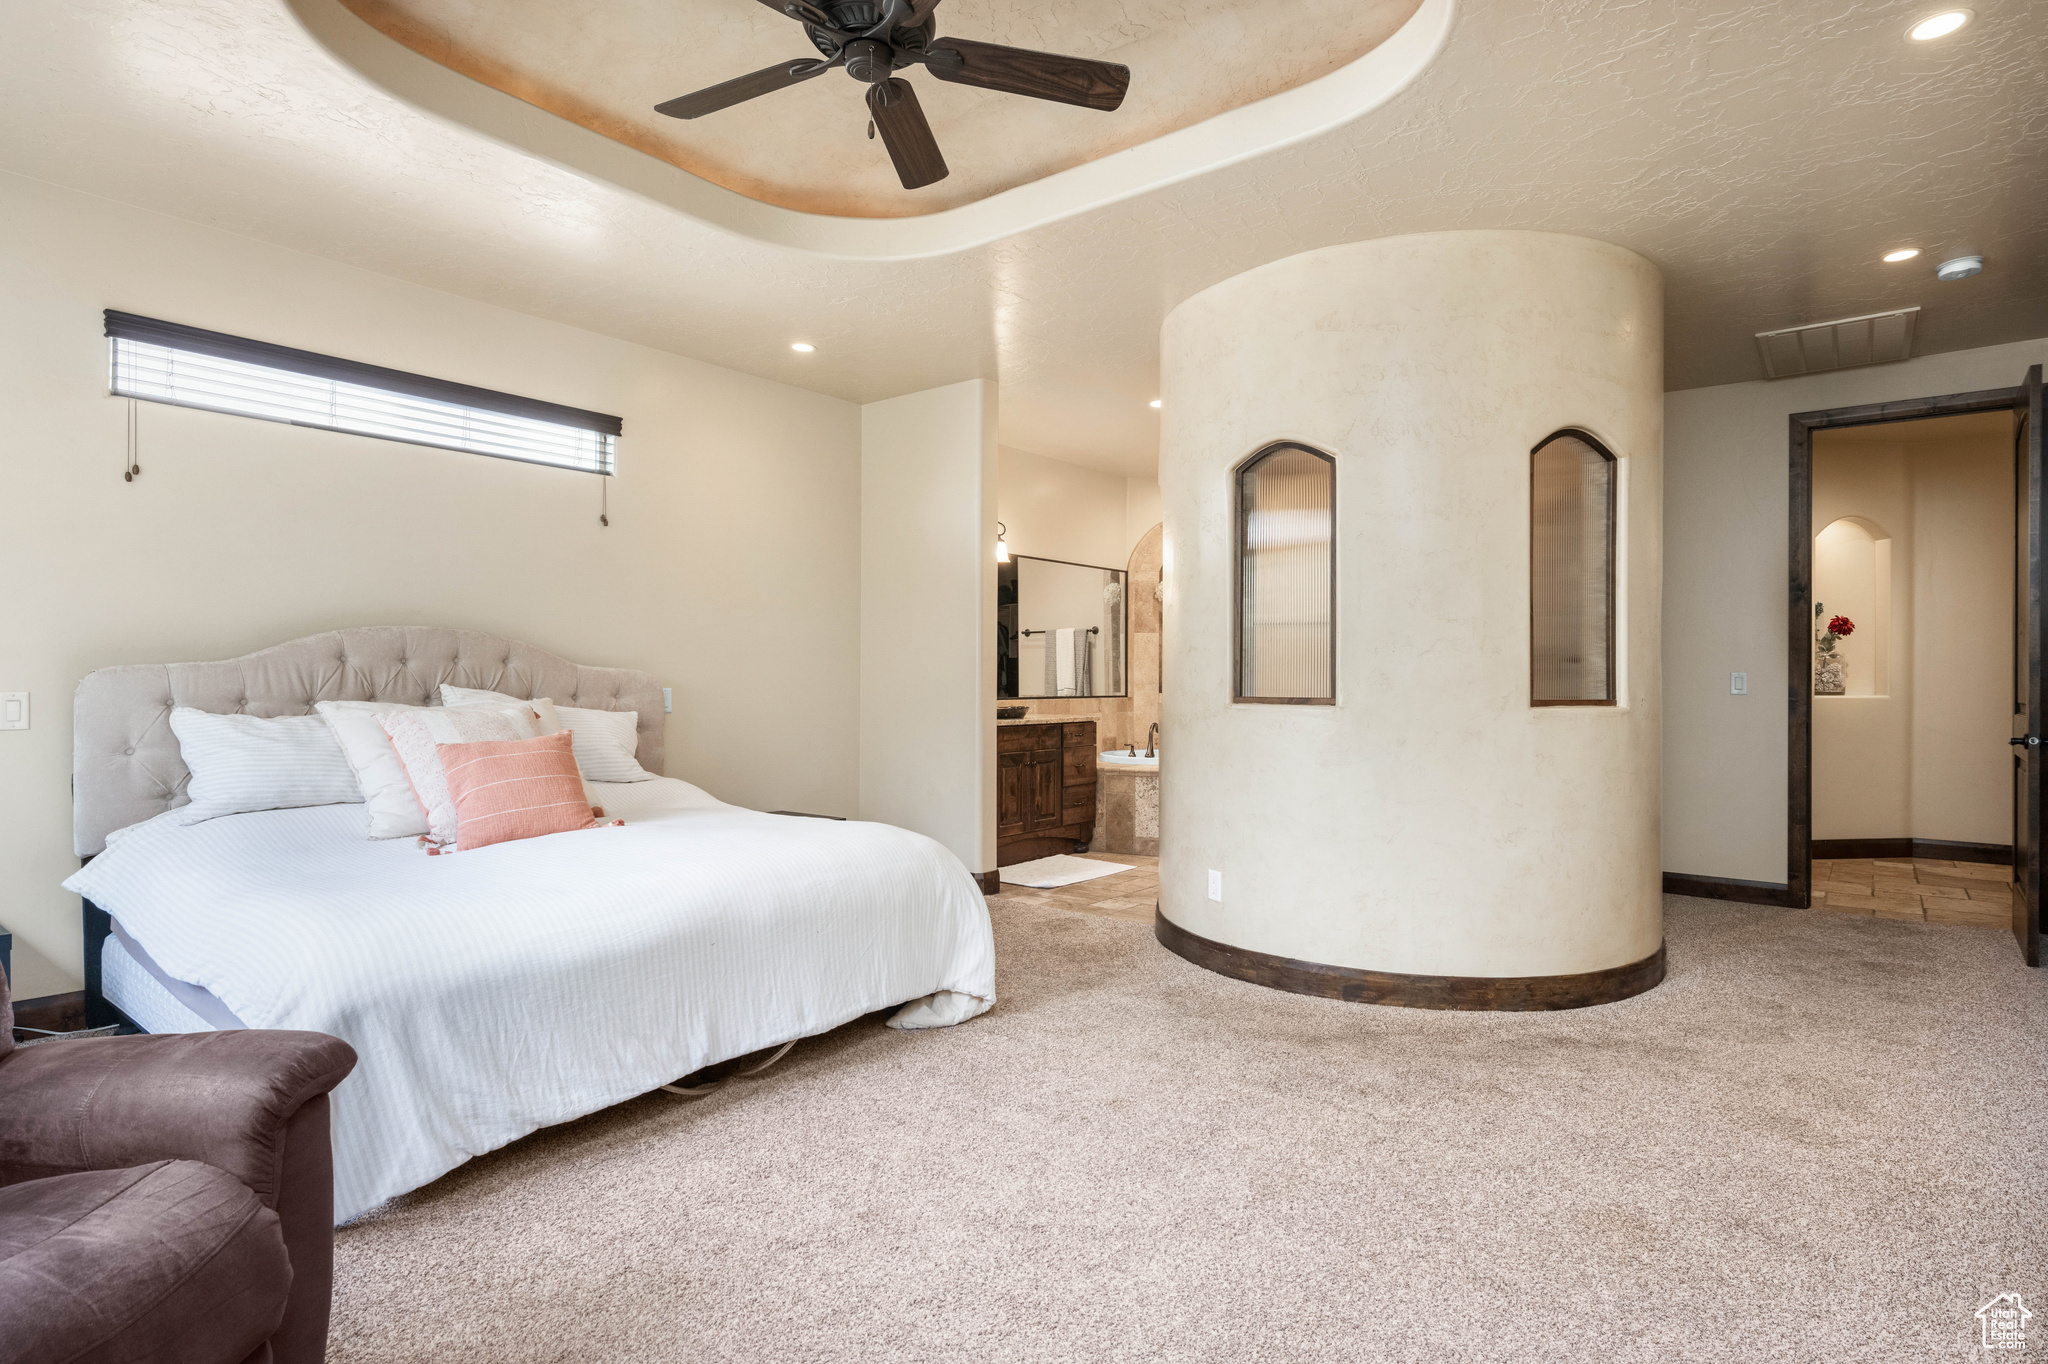 Bedroom with ceiling fan, connected bathroom, and carpet flooring